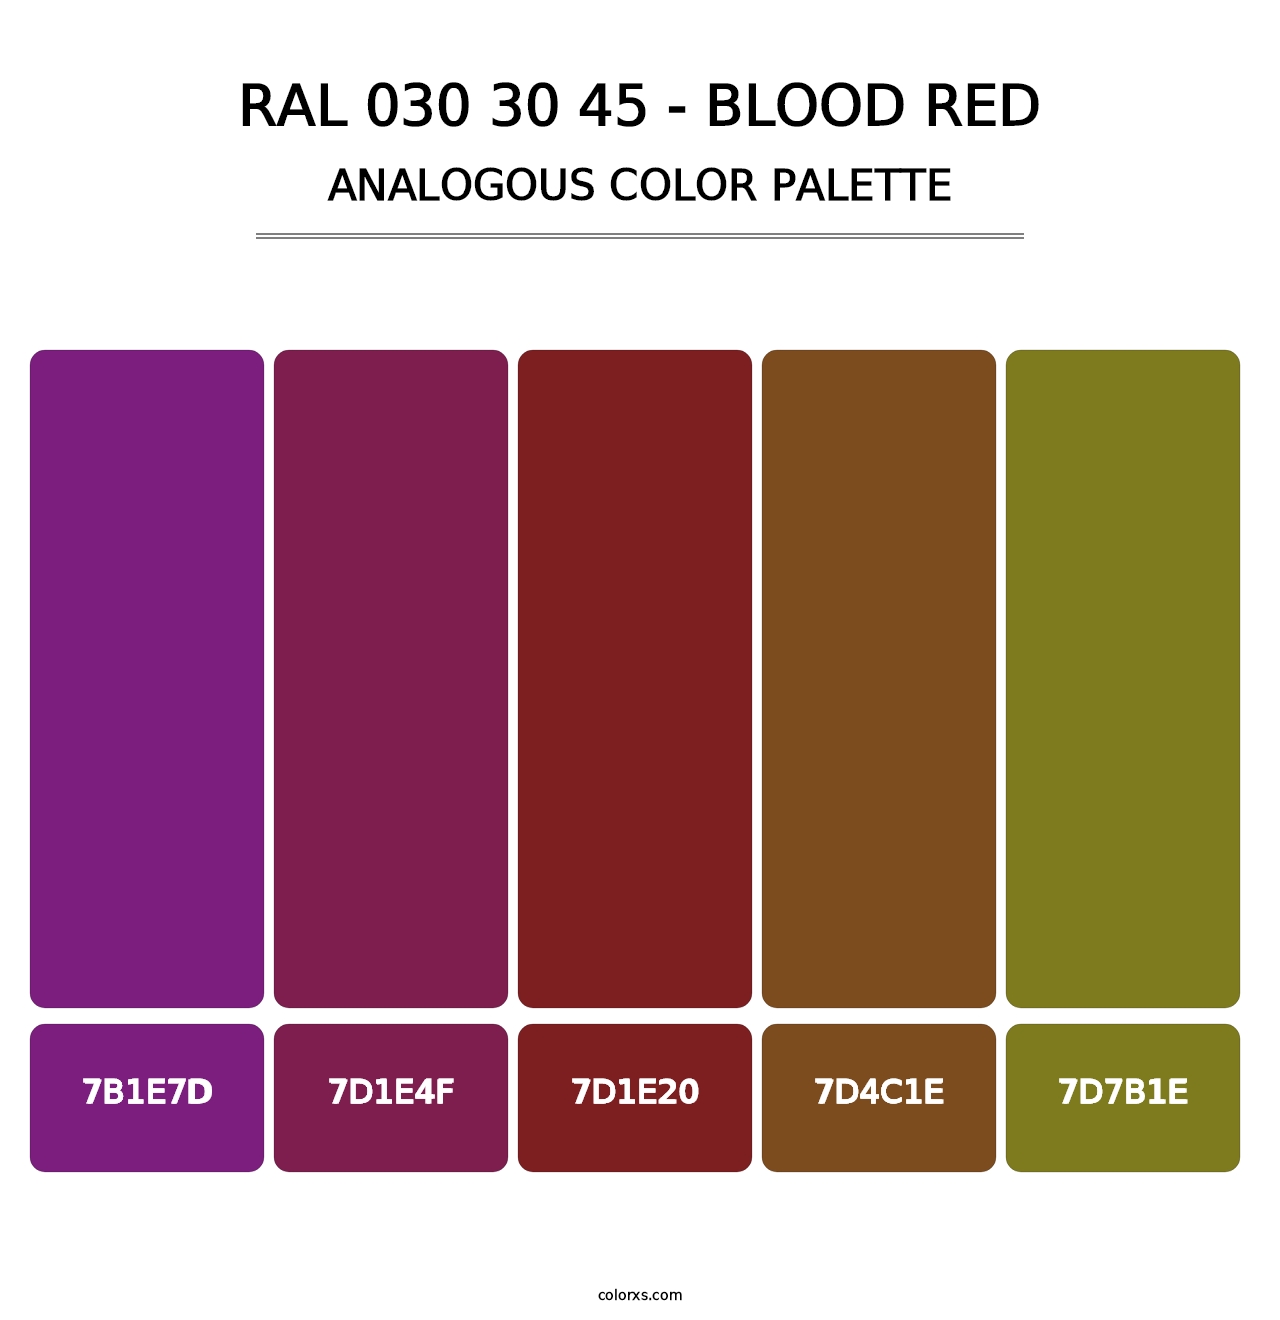 RAL 030 30 45 - Blood Red - Analogous Color Palette